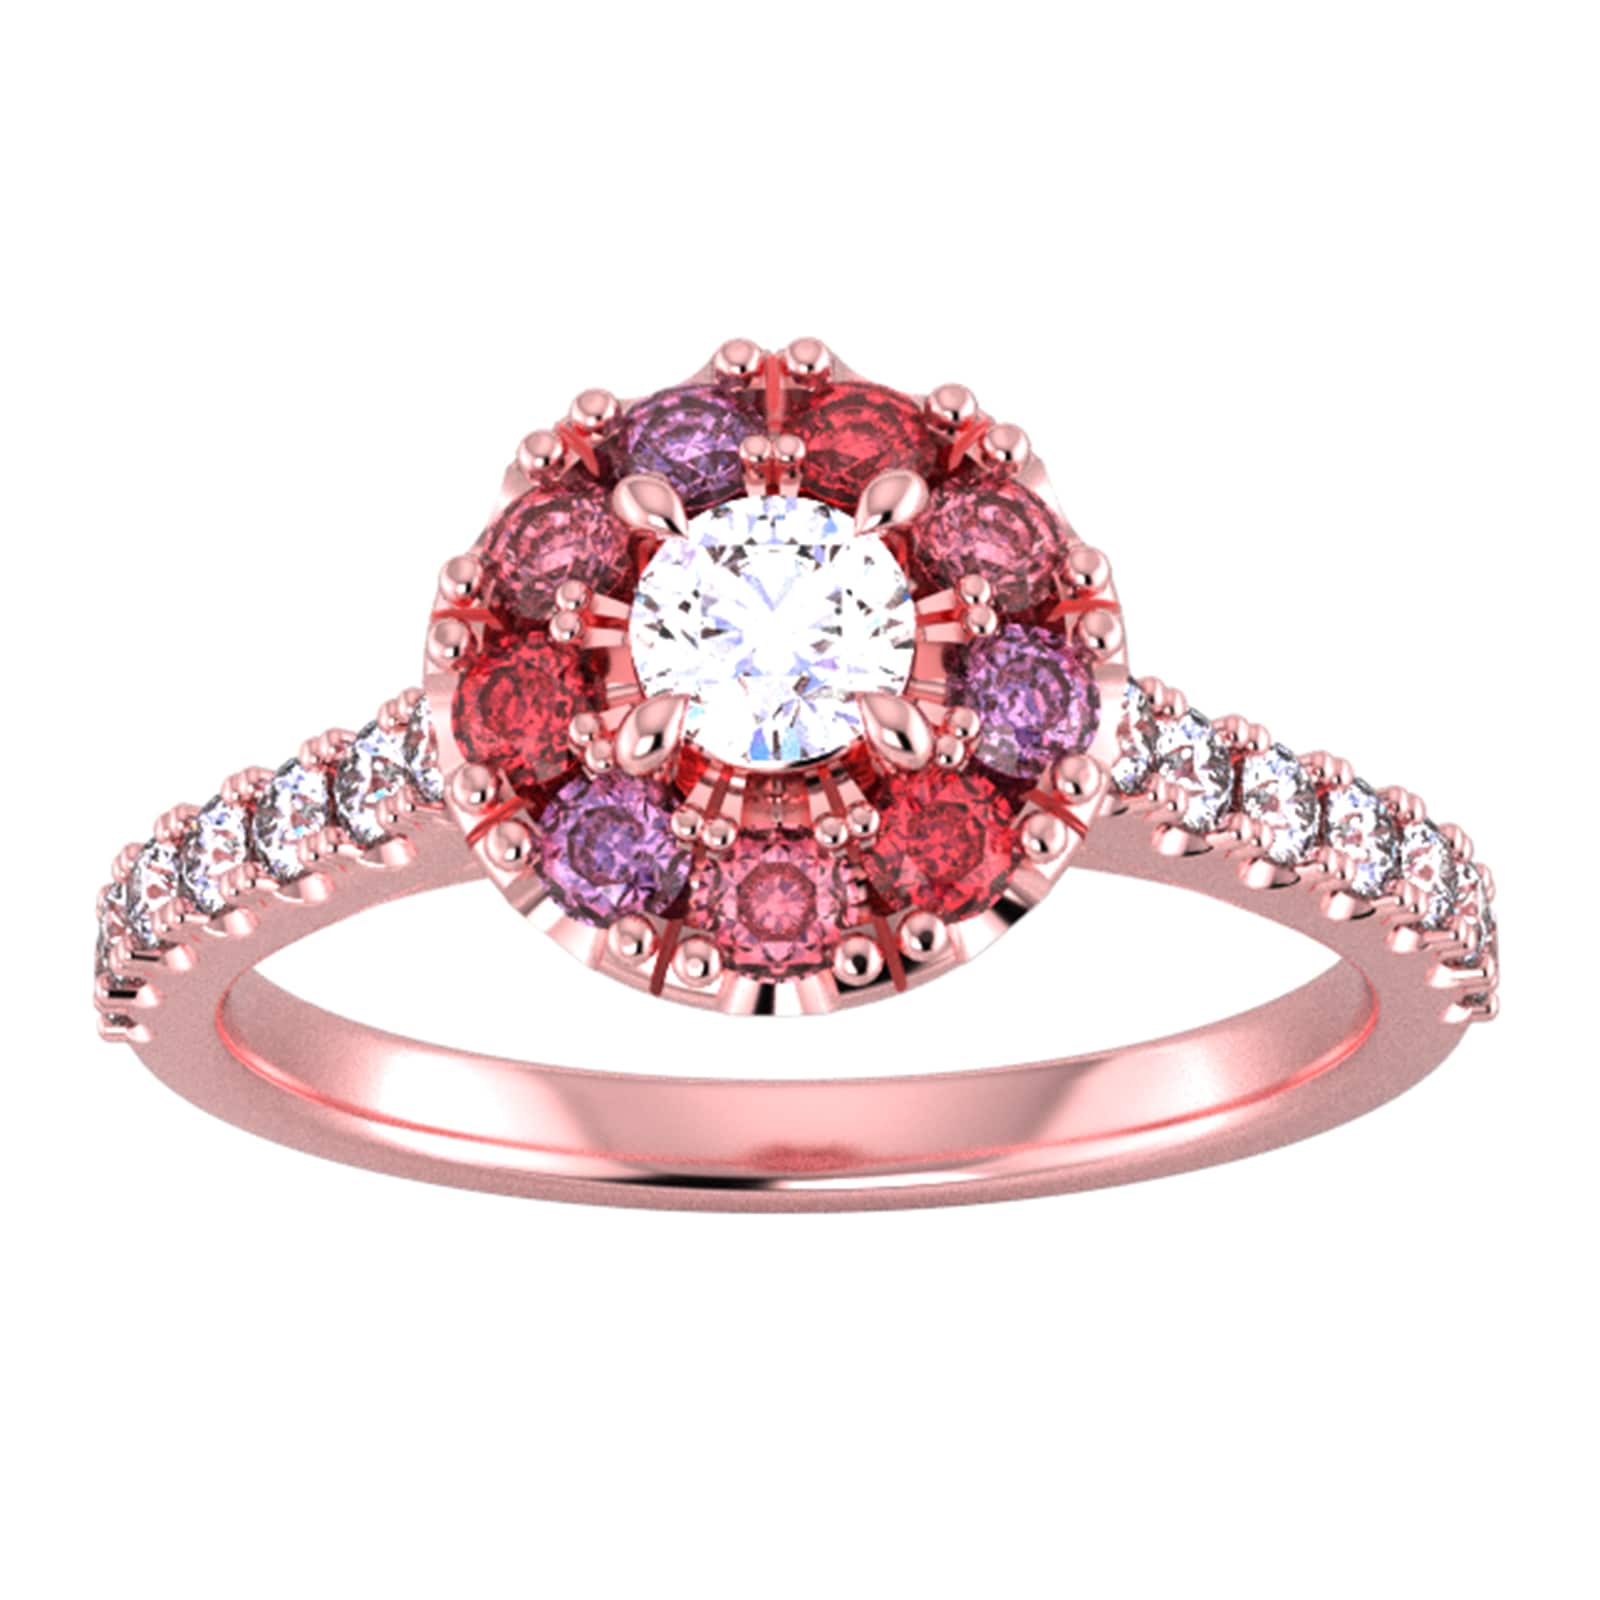 9ct Rose Gold Diamond & Red, Pink, Purple Sapphire Halo Ring - Ring Size L.5